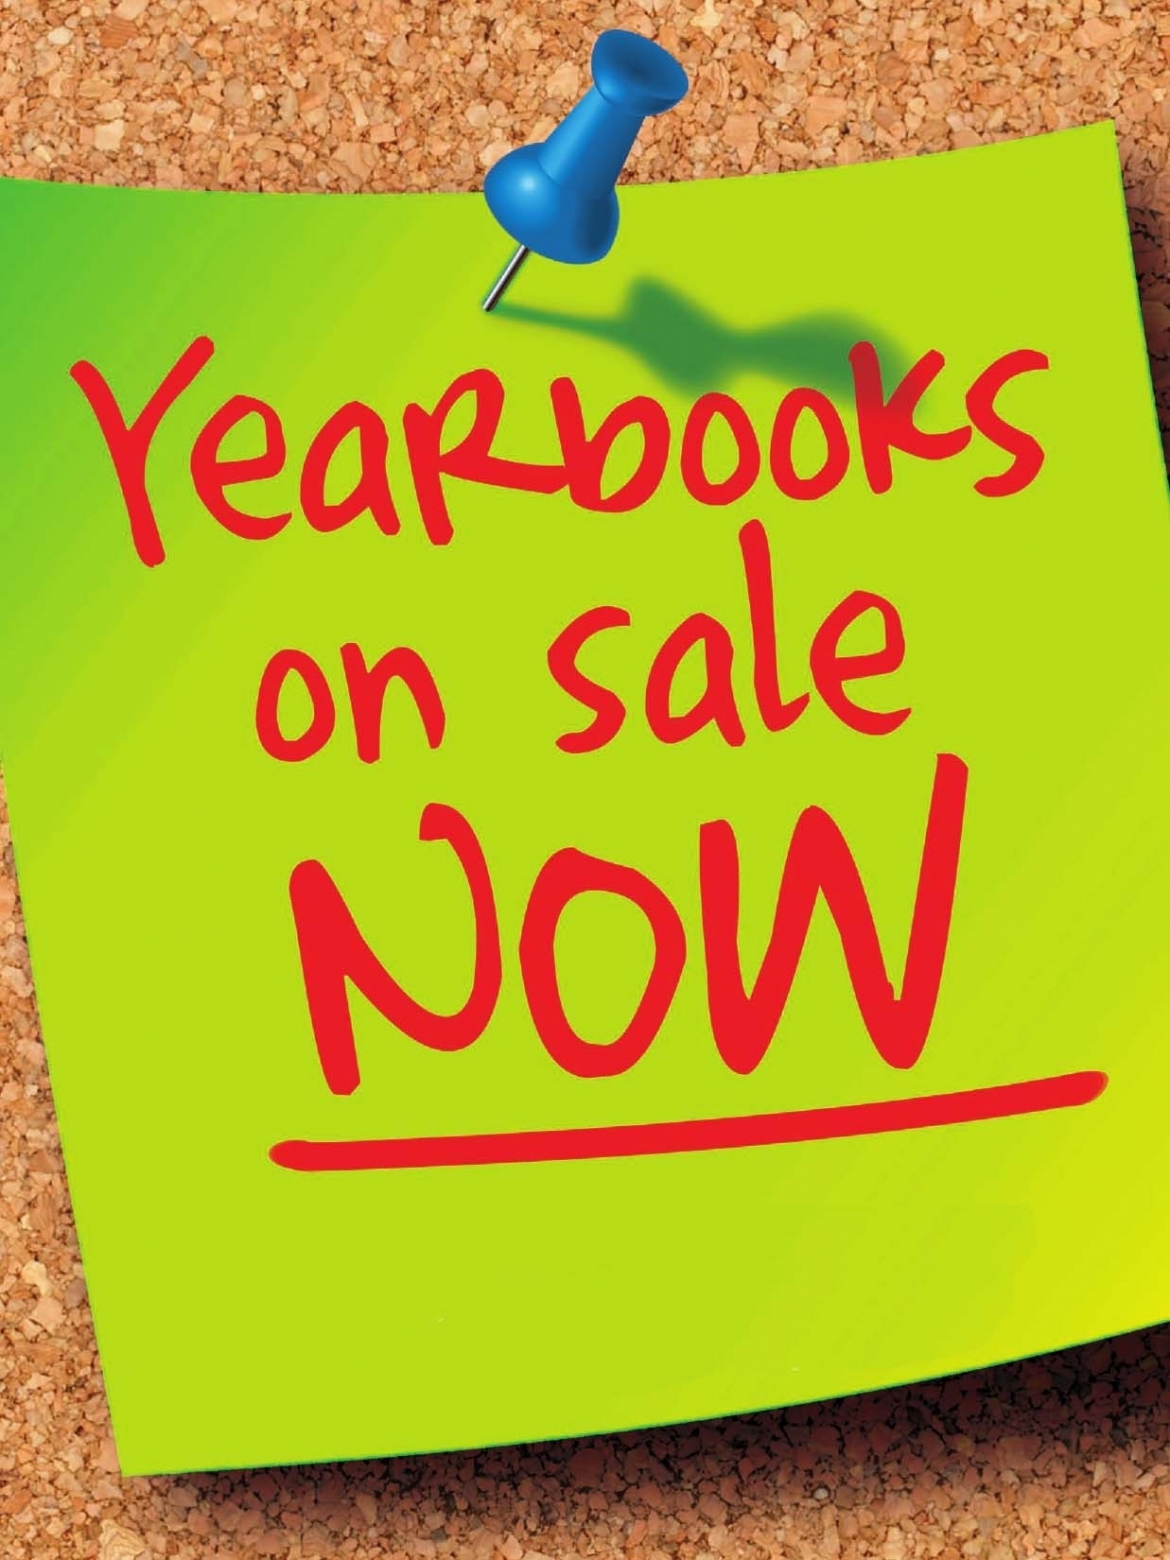 Yearbook on Sale NOW Post-It Note